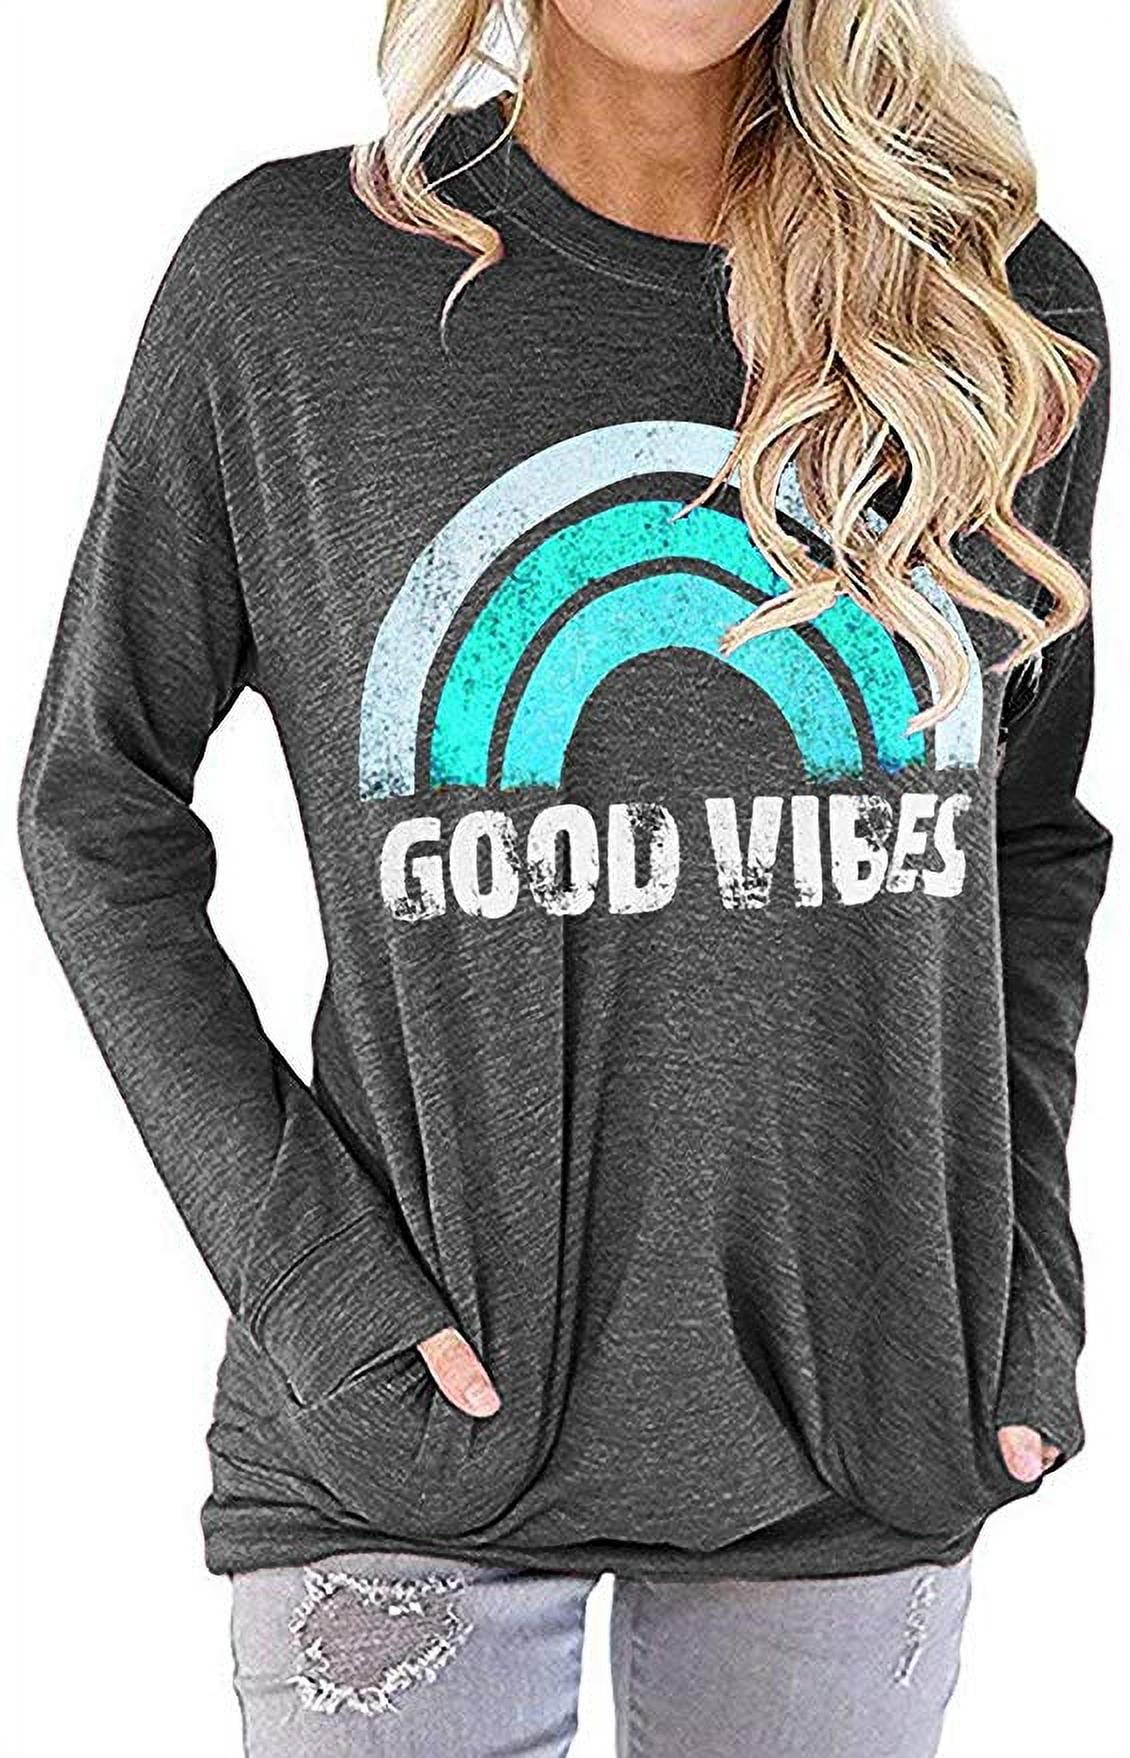 Good Vibes Rainbow Graphic Tees for Women Letter Print Short Sleeve Casual Tops T-Shirt